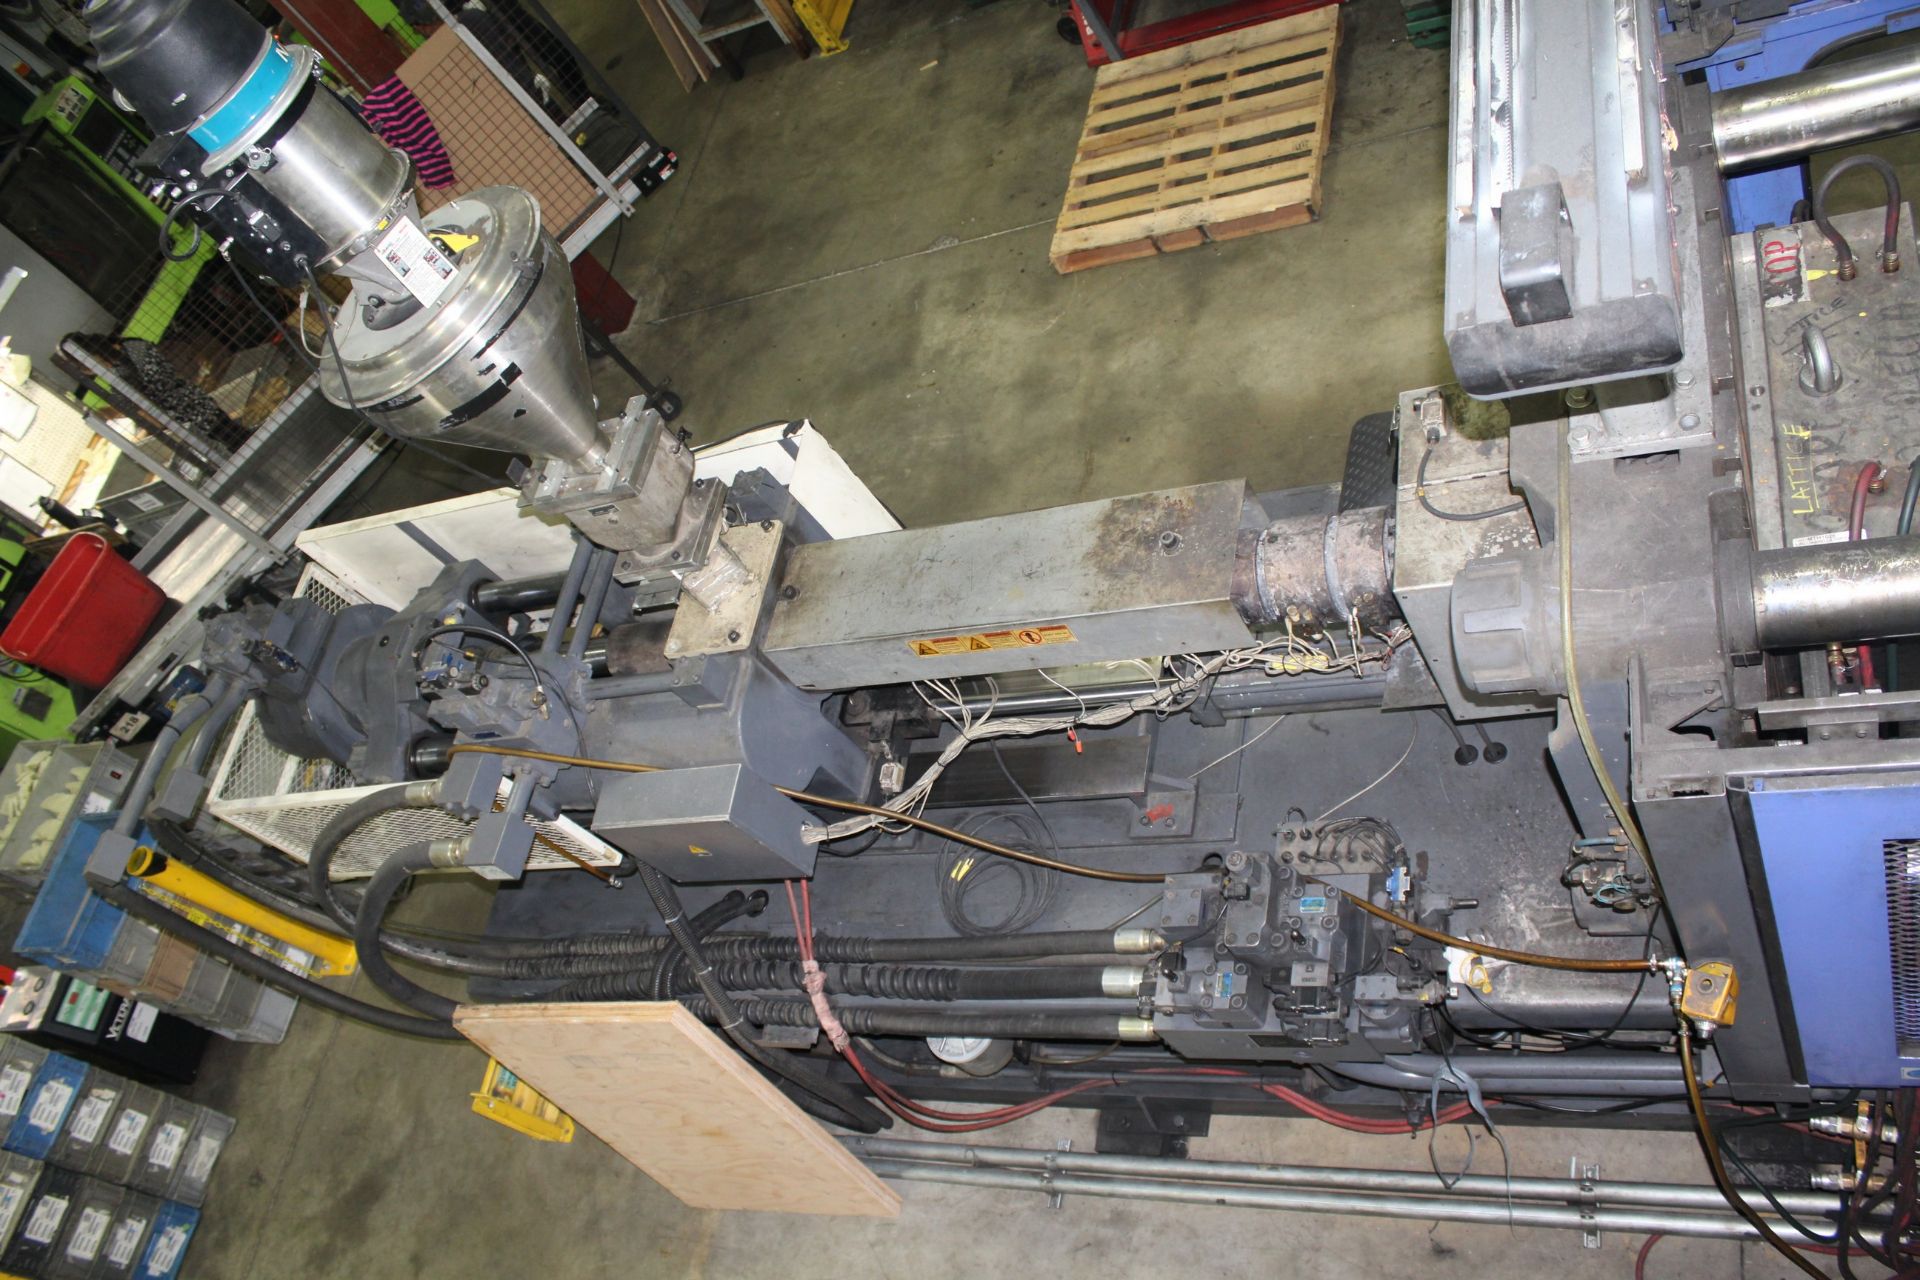 LG GOLD STAR 500H INJECTION MOLDER, 500-TON CAP. - Image 25 of 38